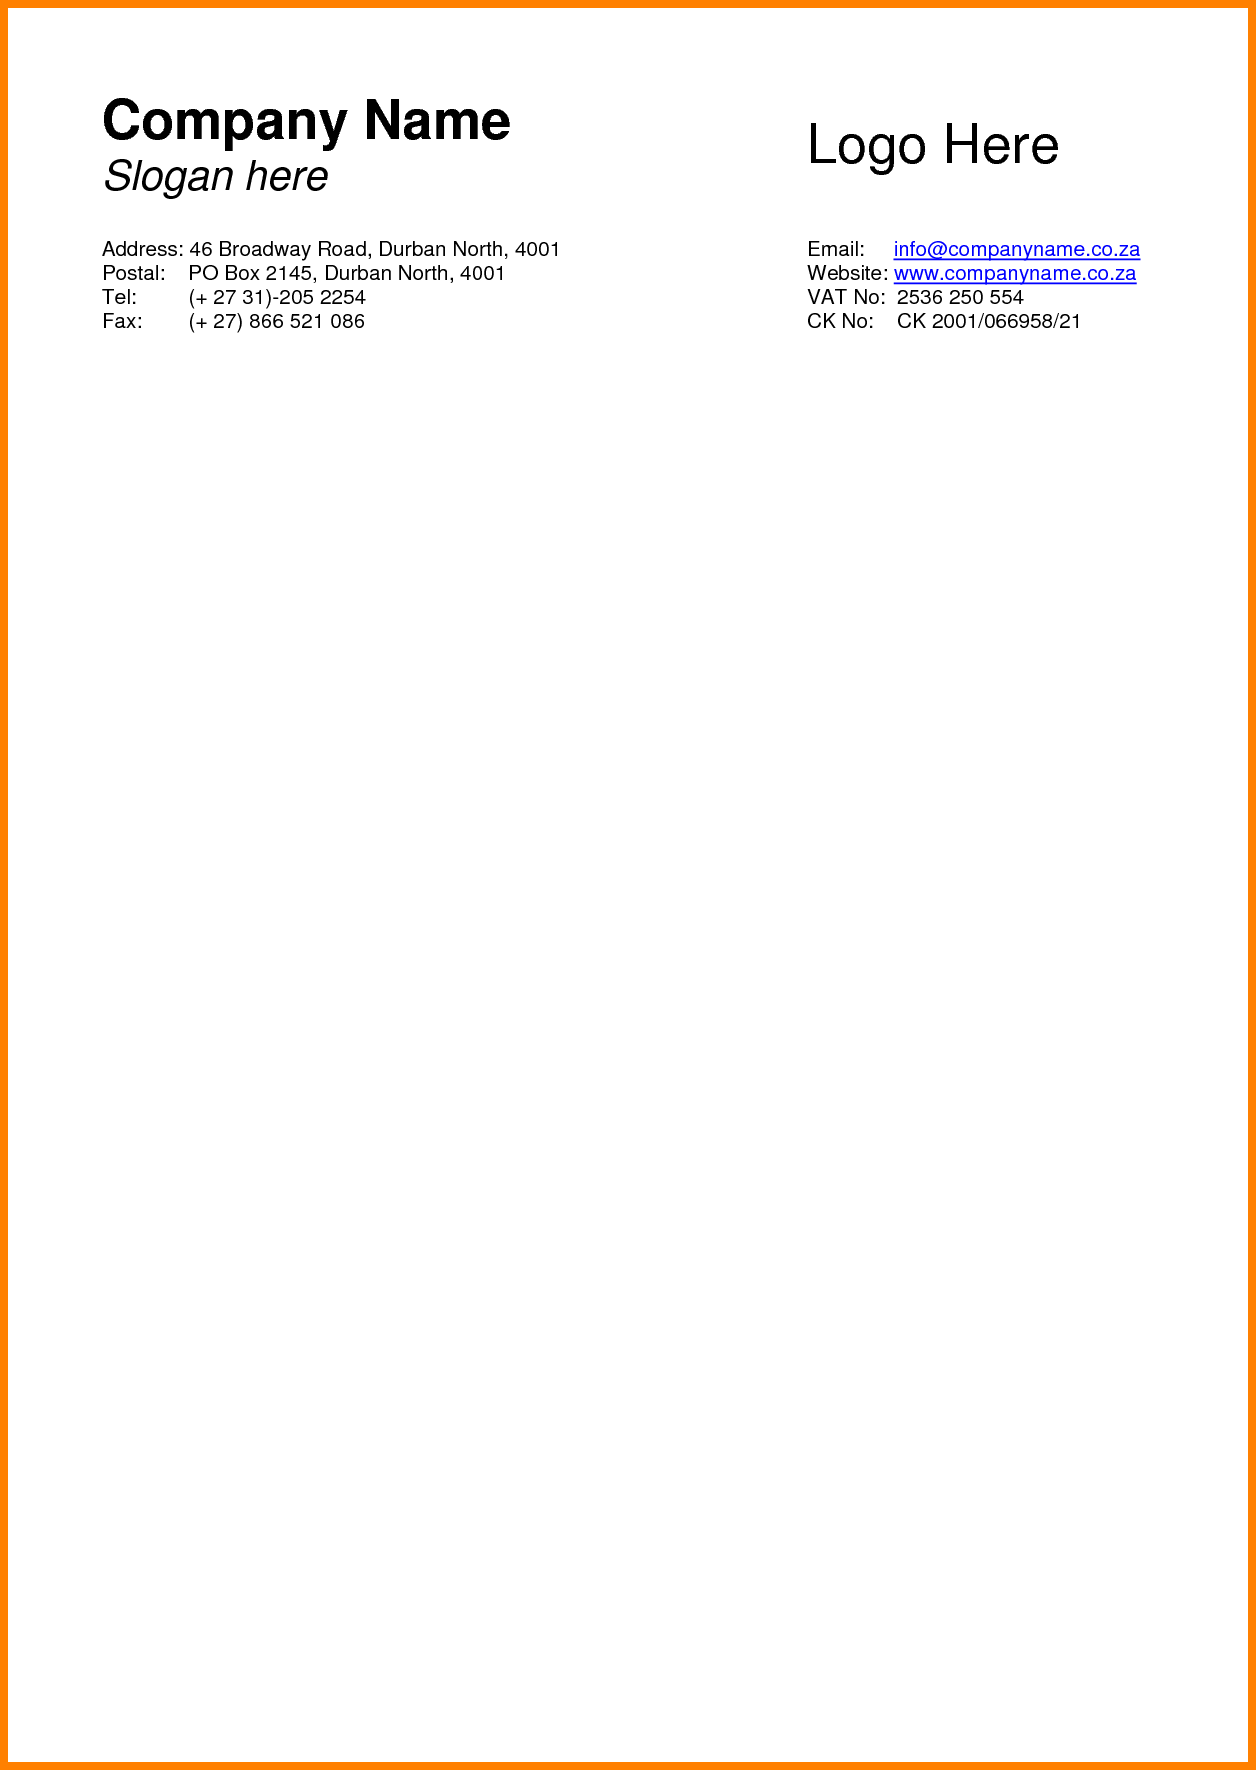 business letterhead examples   Into.anysearch.co